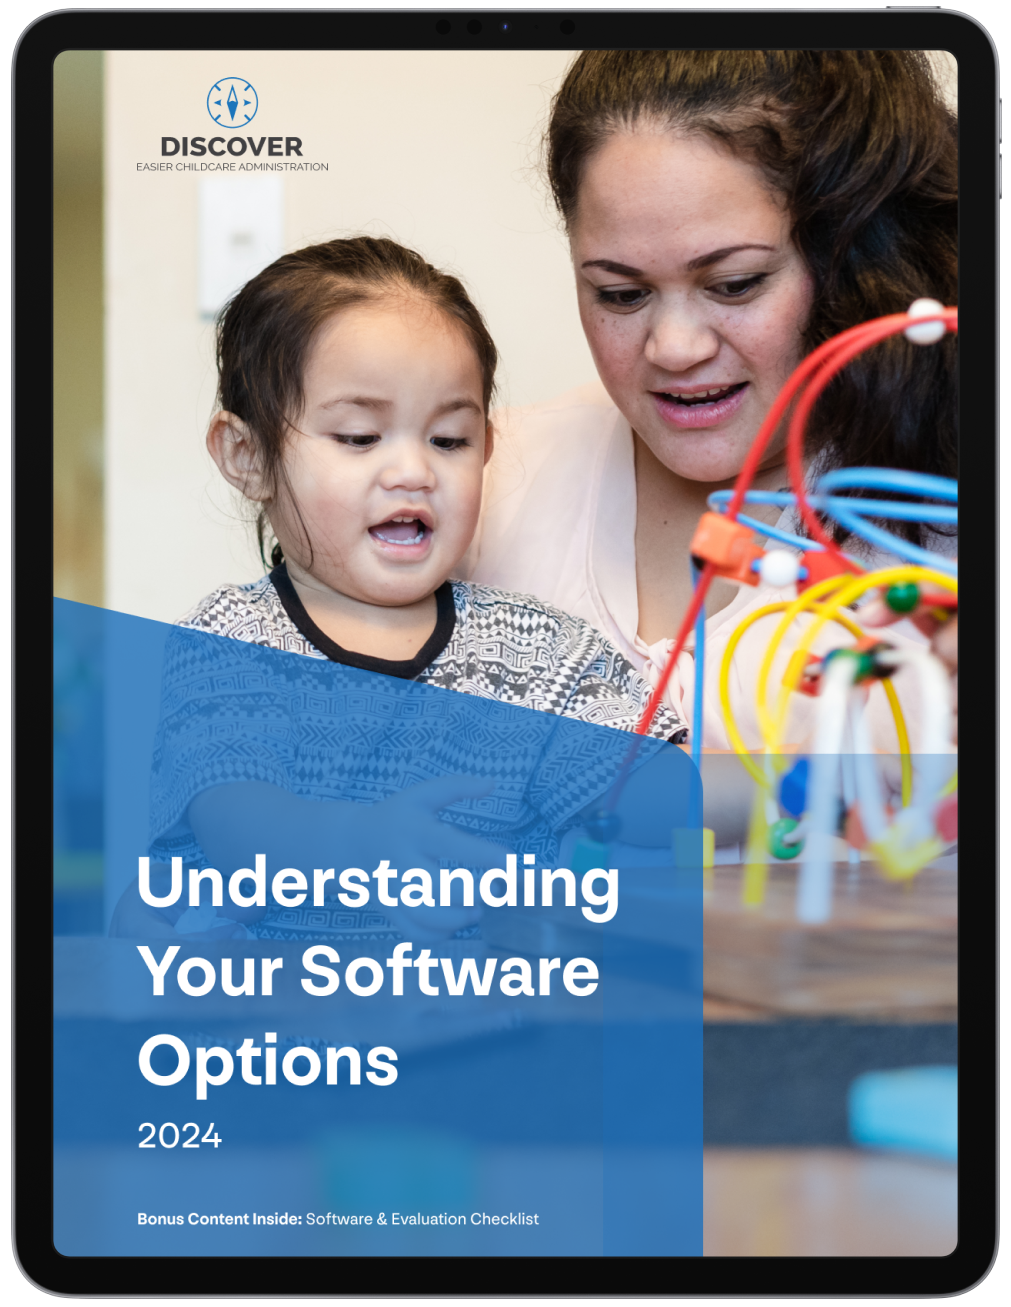 Discover's Understanding Your Software Options Guide Cover